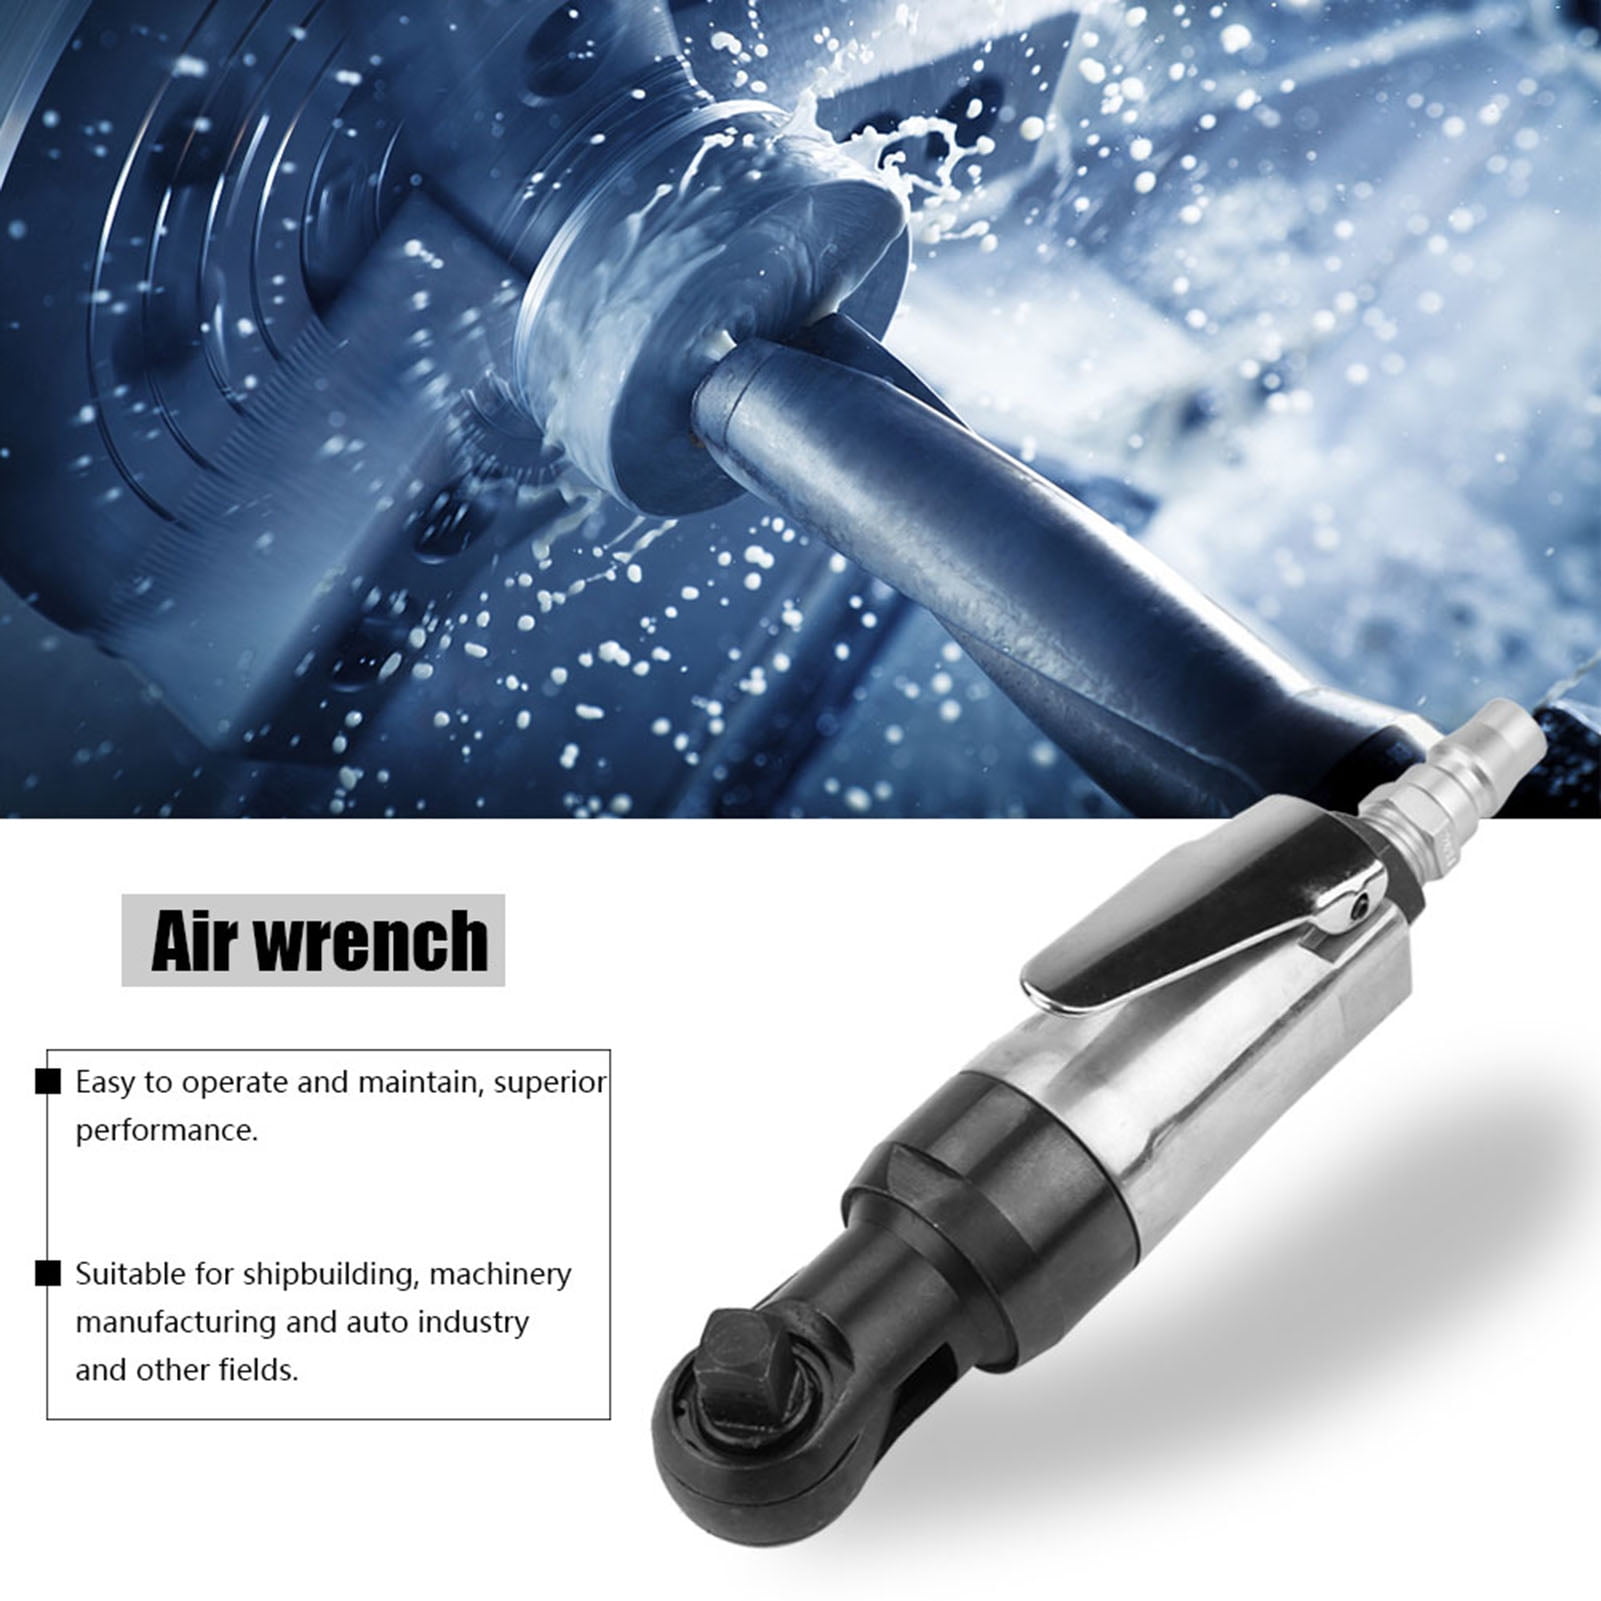 1/4 Air Ratchet Wrench,Square Drive Straight Shank Pneumatic Air Ratchet Wrench Professional Tool 